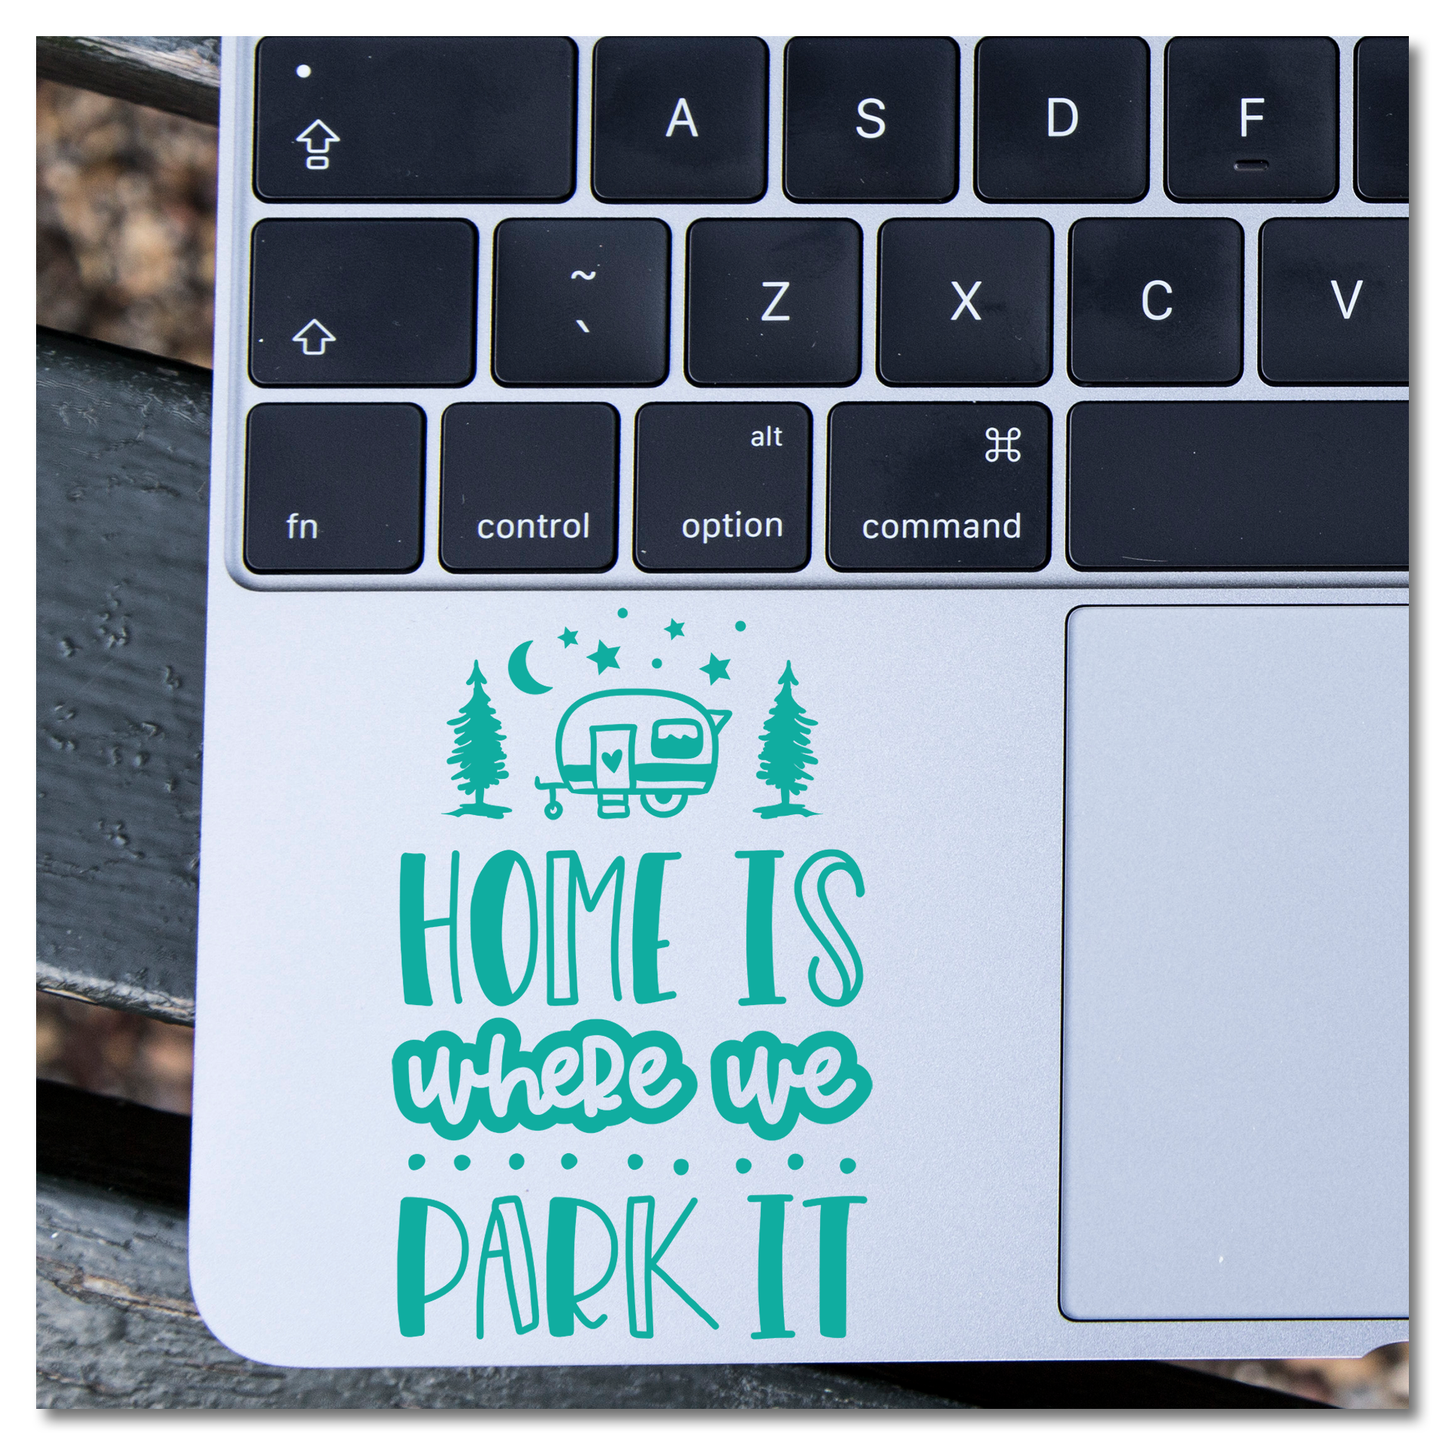 Home Is Where We Park It Vinyl Decal Sticker